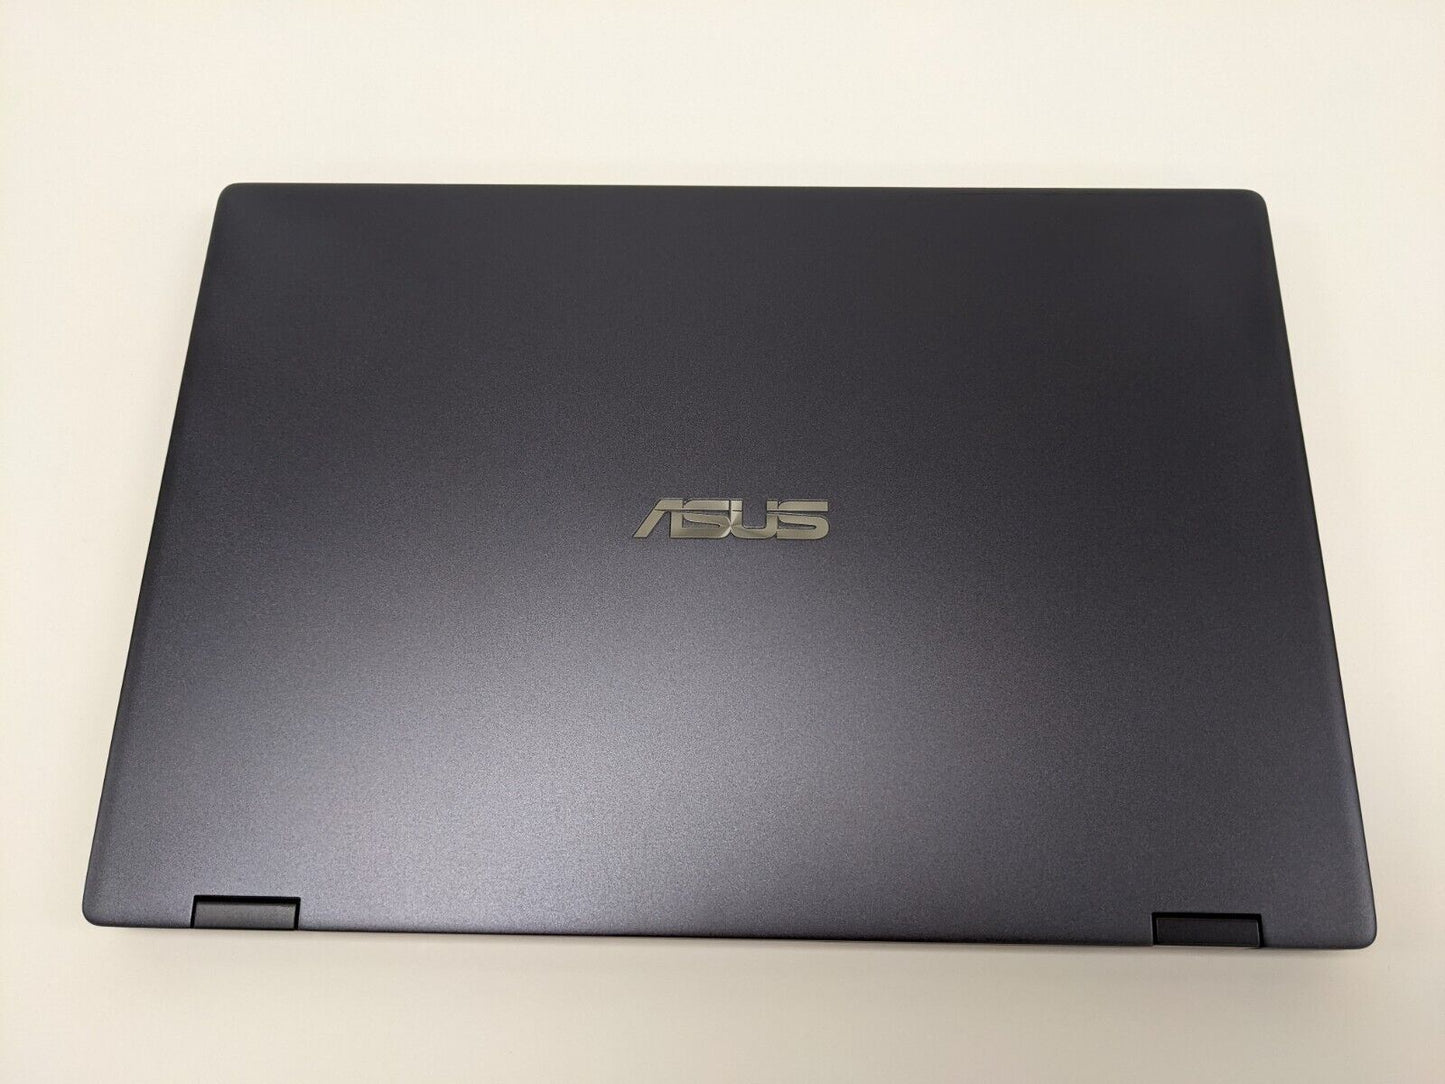 Asus VivoBook Flip 14" i5 8th 8GB 512GB NVMe Laptop - TP412FA-XB55T Reconditioned